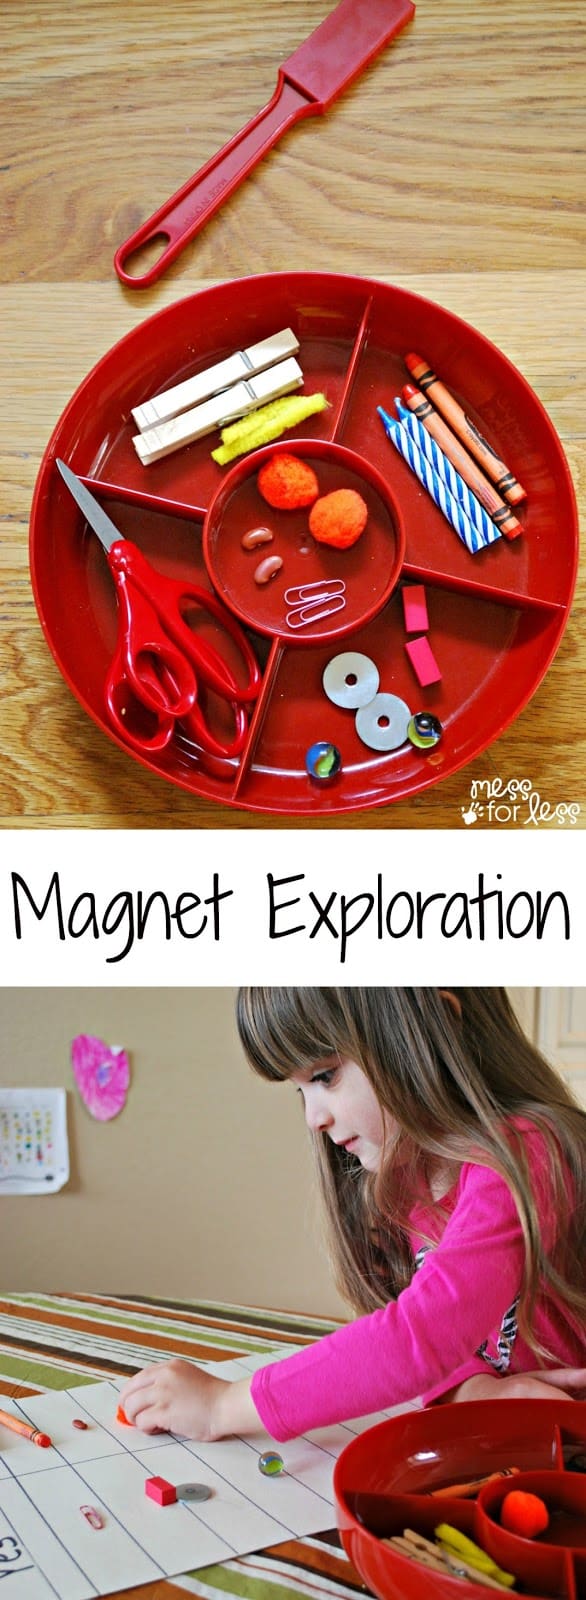 Preschool Science - Magnet Exploration - Mess for Less